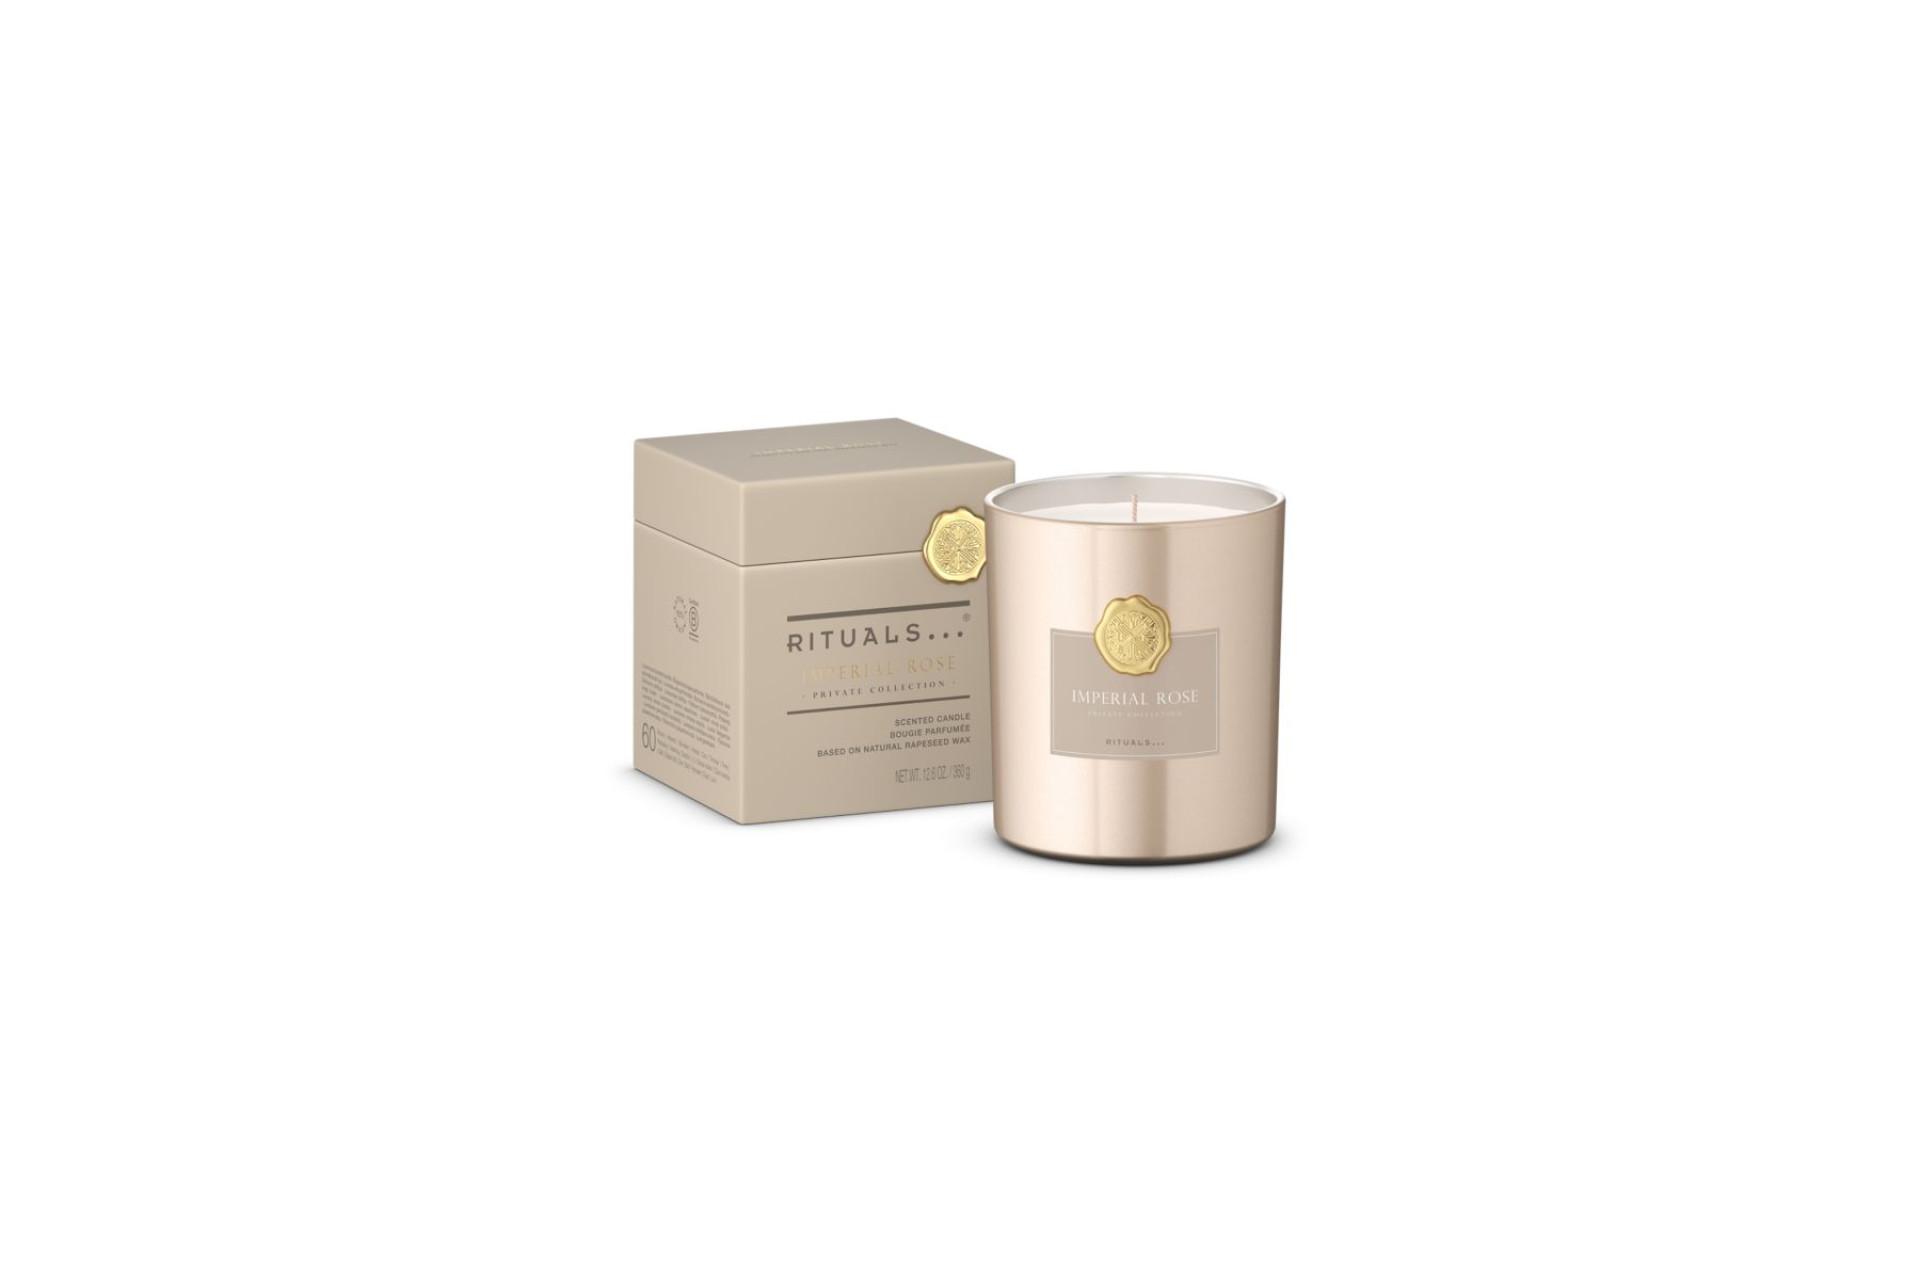 Acheter Rituals Imperial Rose Scented Candle